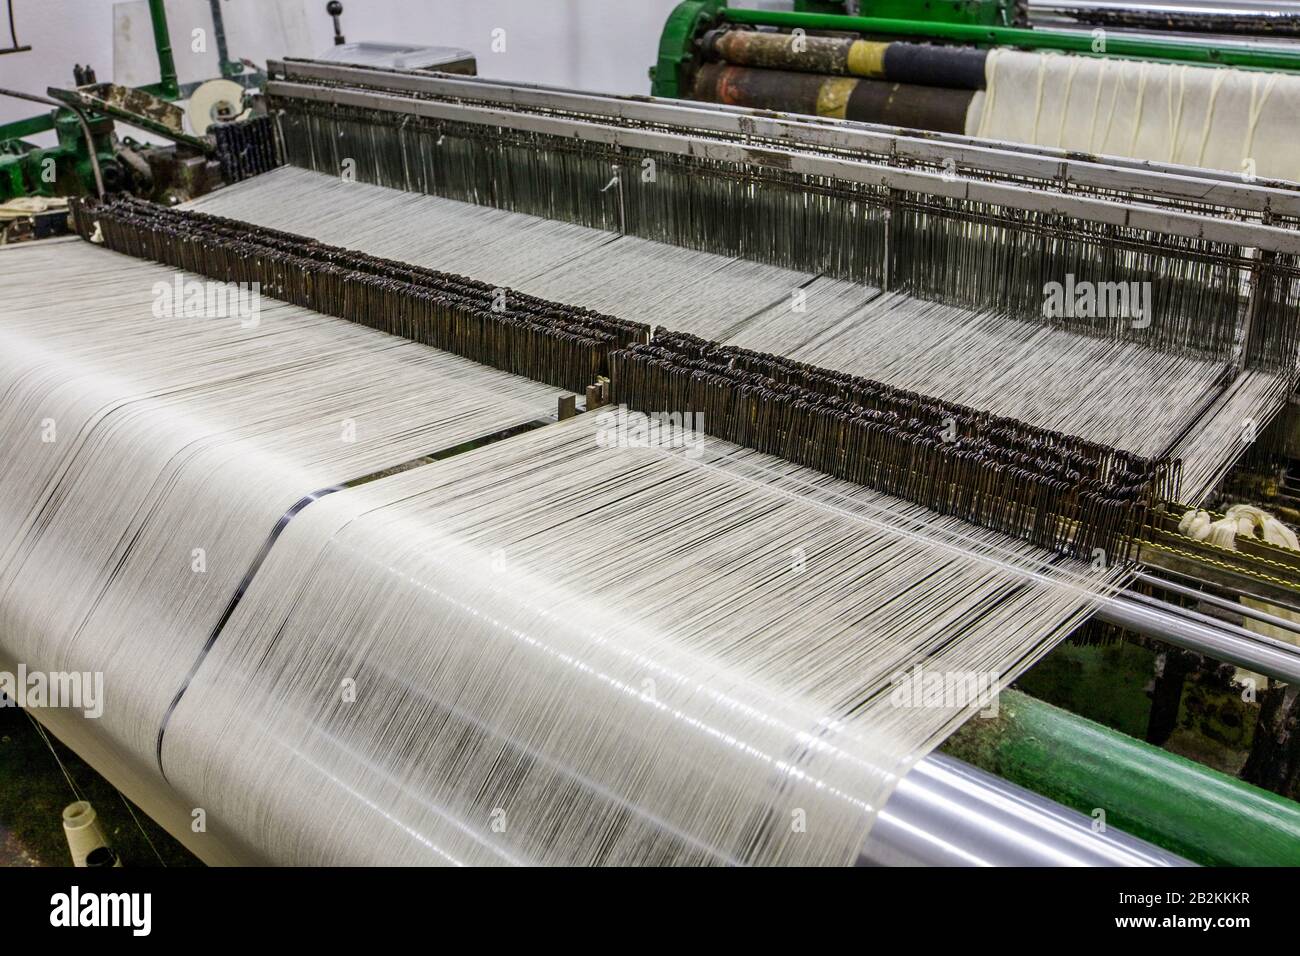 Weaving Machine High Point View With Explicit Fabrication Detail Stock Photo